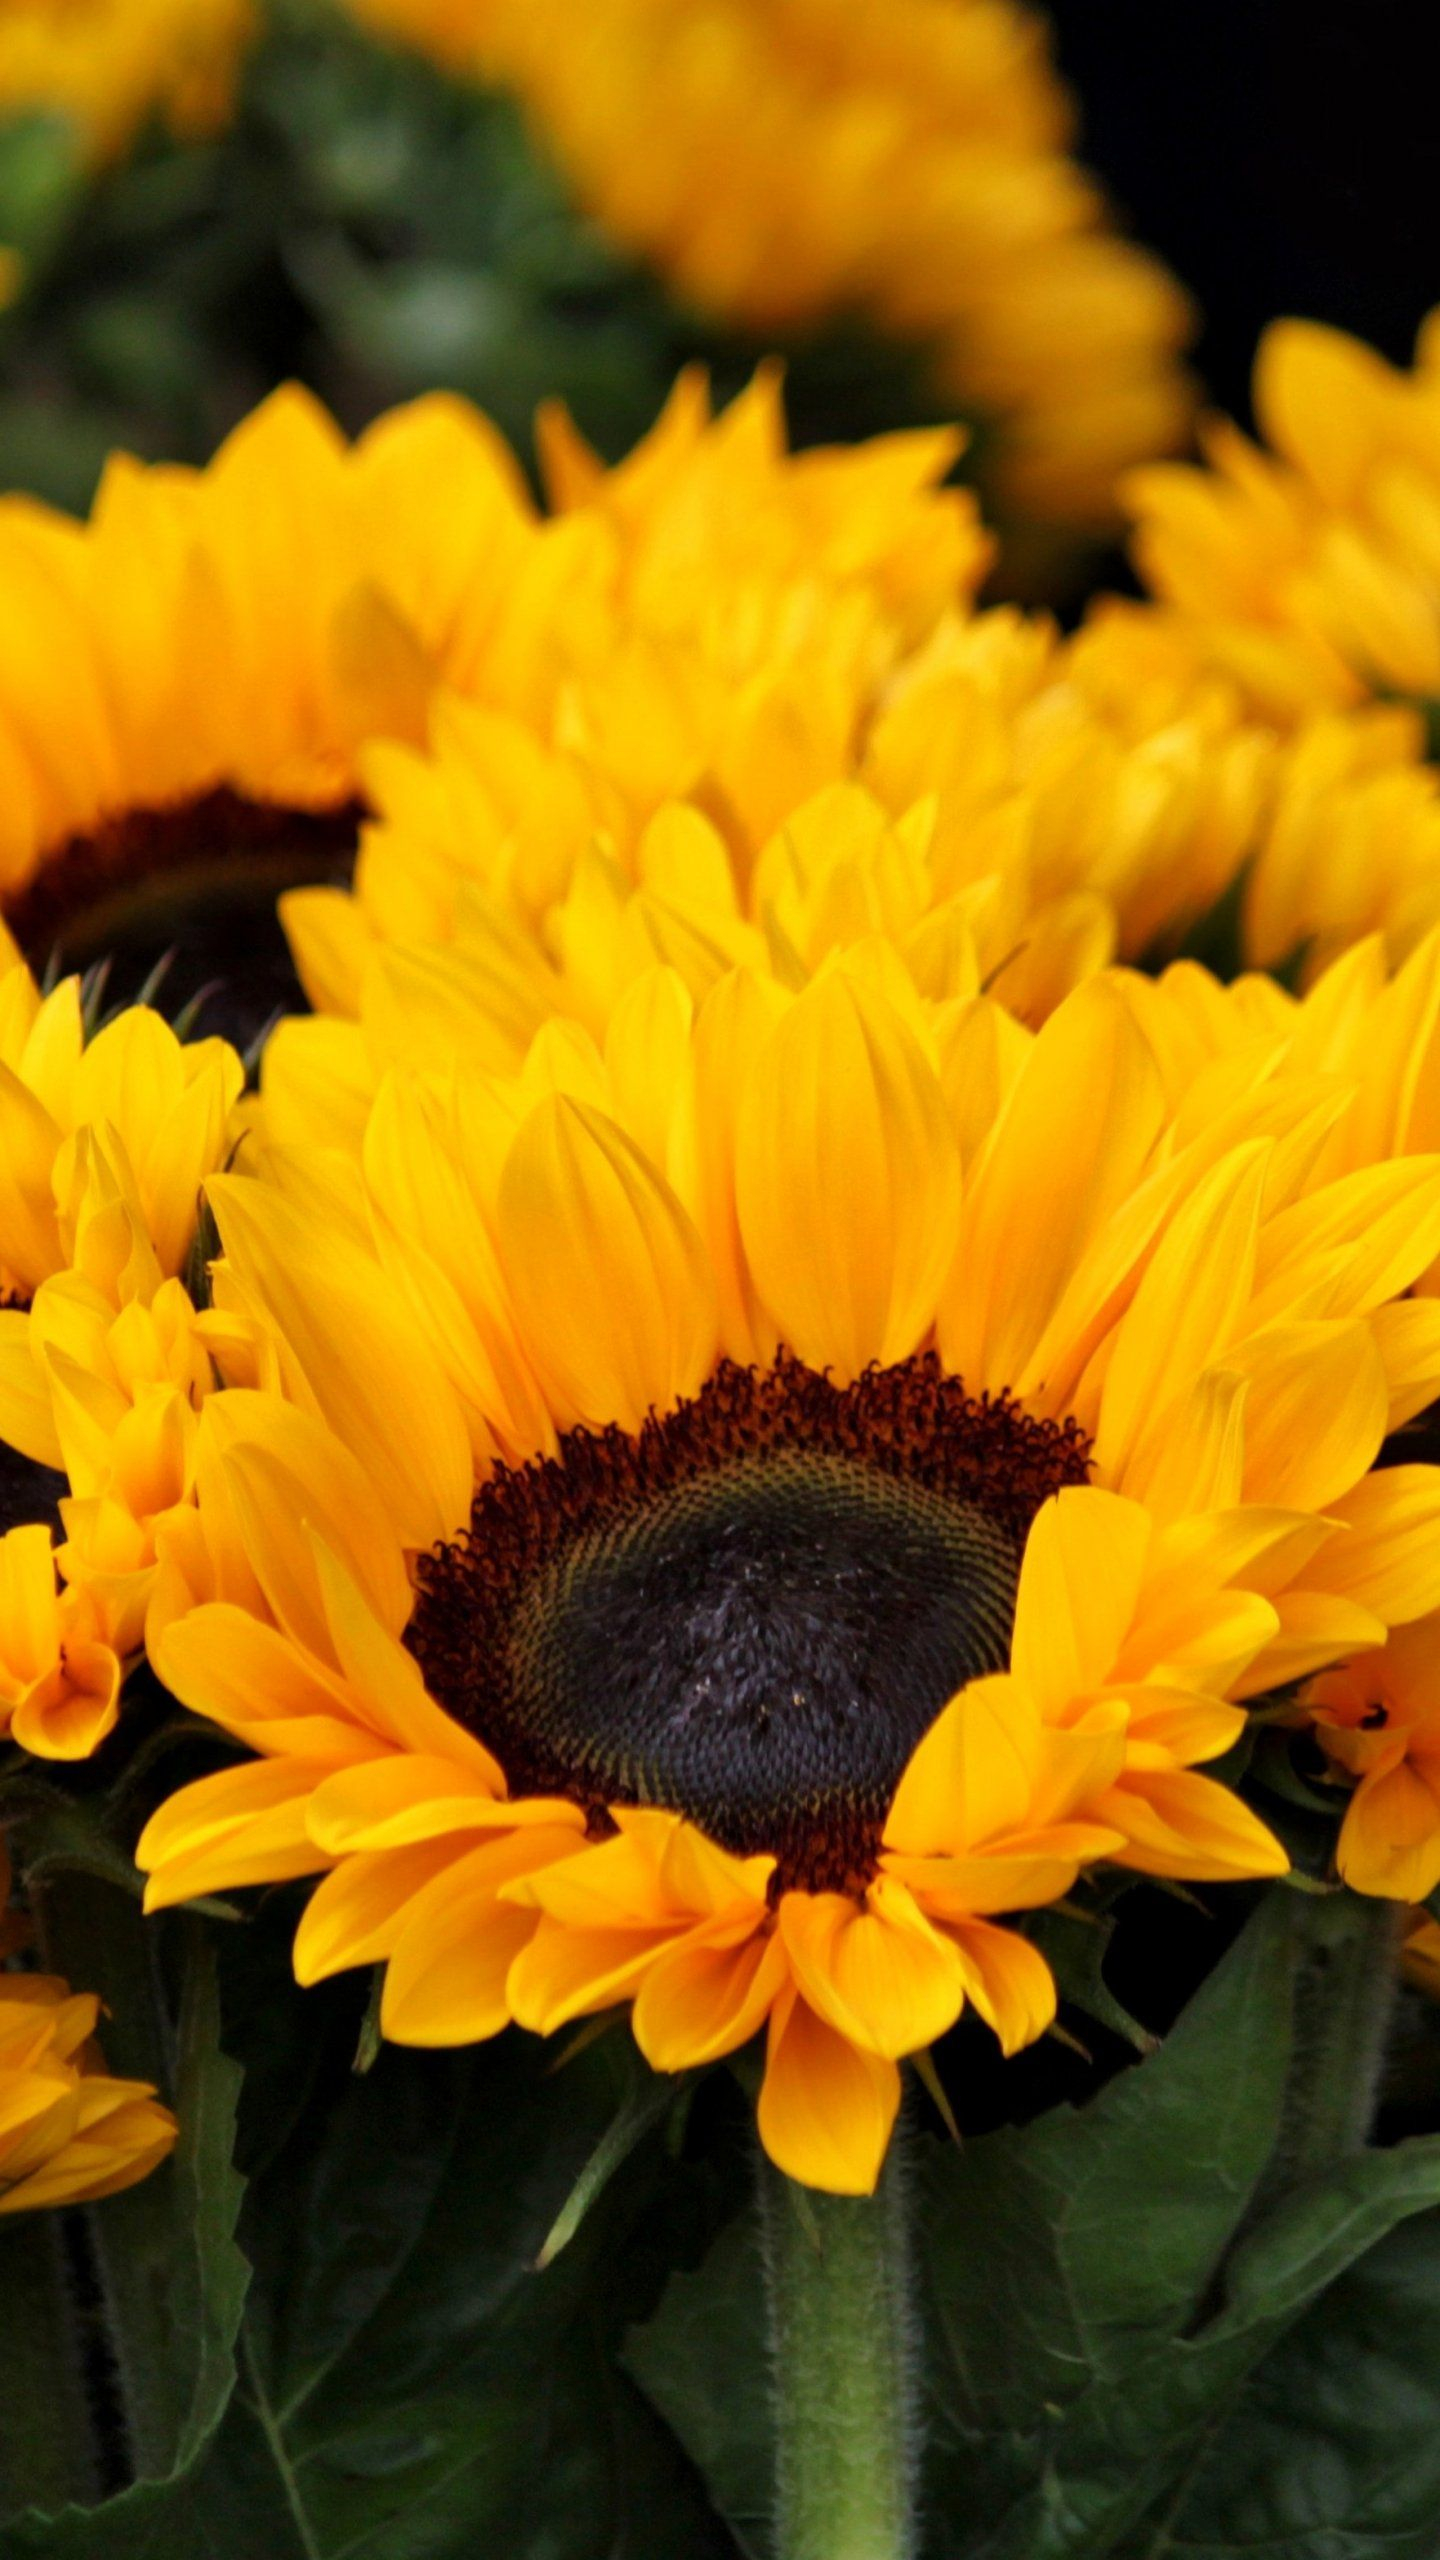 1440x2560 Sunflowers Wallpaper iPhone, Android \u0026 Desktop Backgrounds | Sunflower wallpaper, Sunflower iphone wallpaper, Sunflower pictures